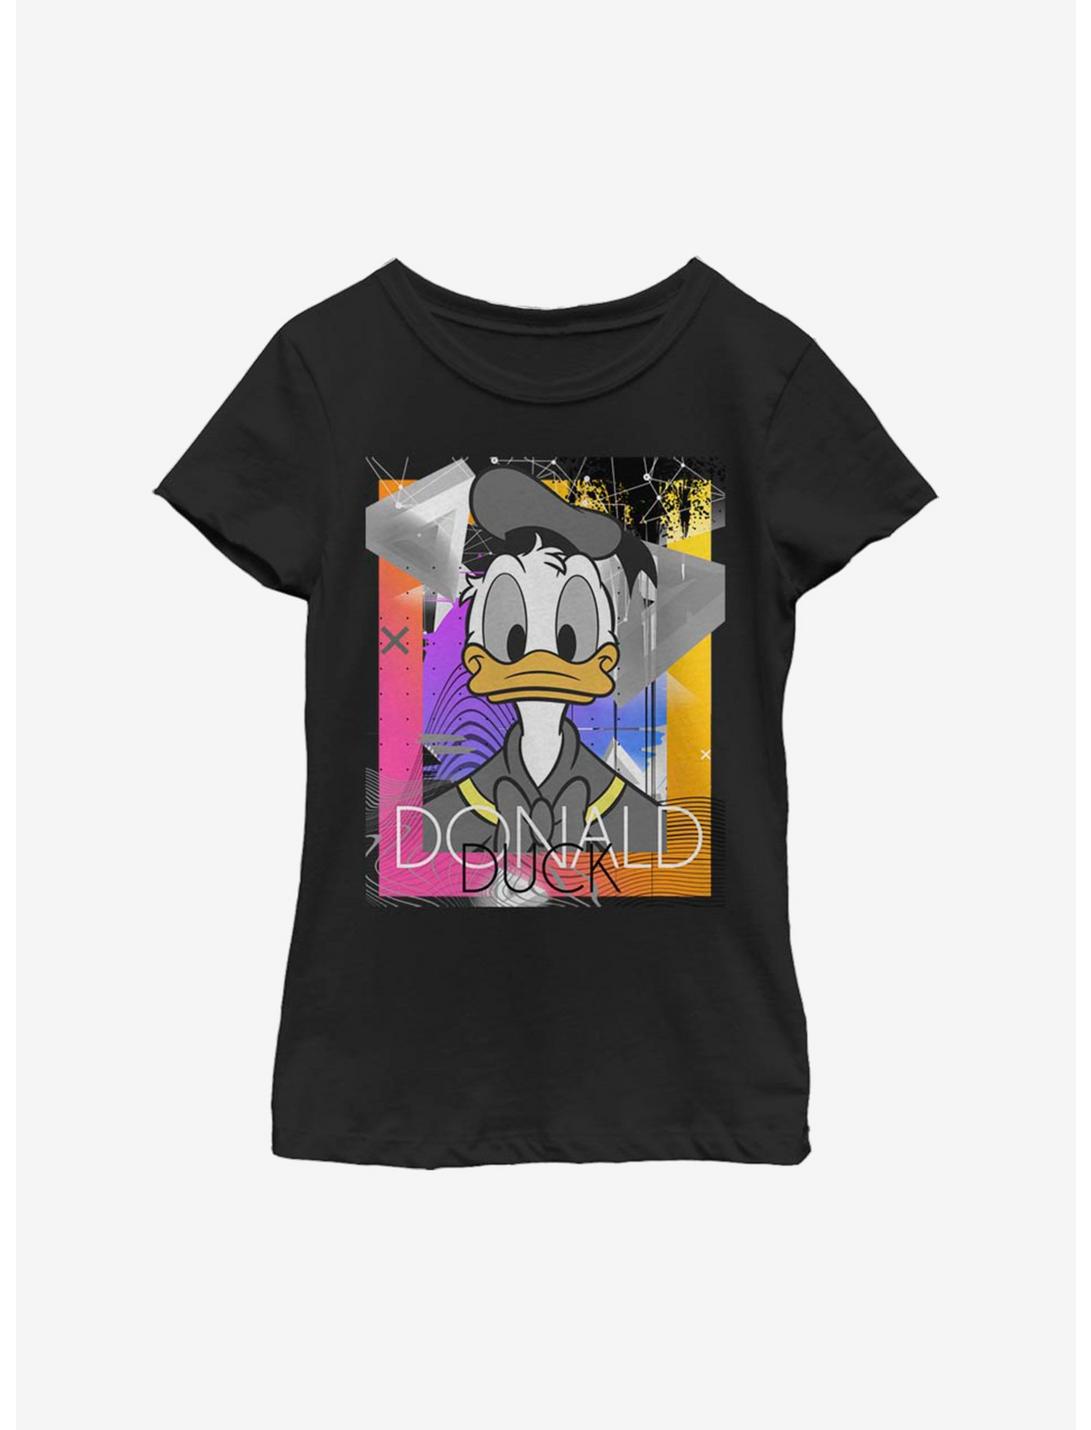 Disney Donald Duck Front And Center Youth Girls T-Shirt, BLACK, hi-res